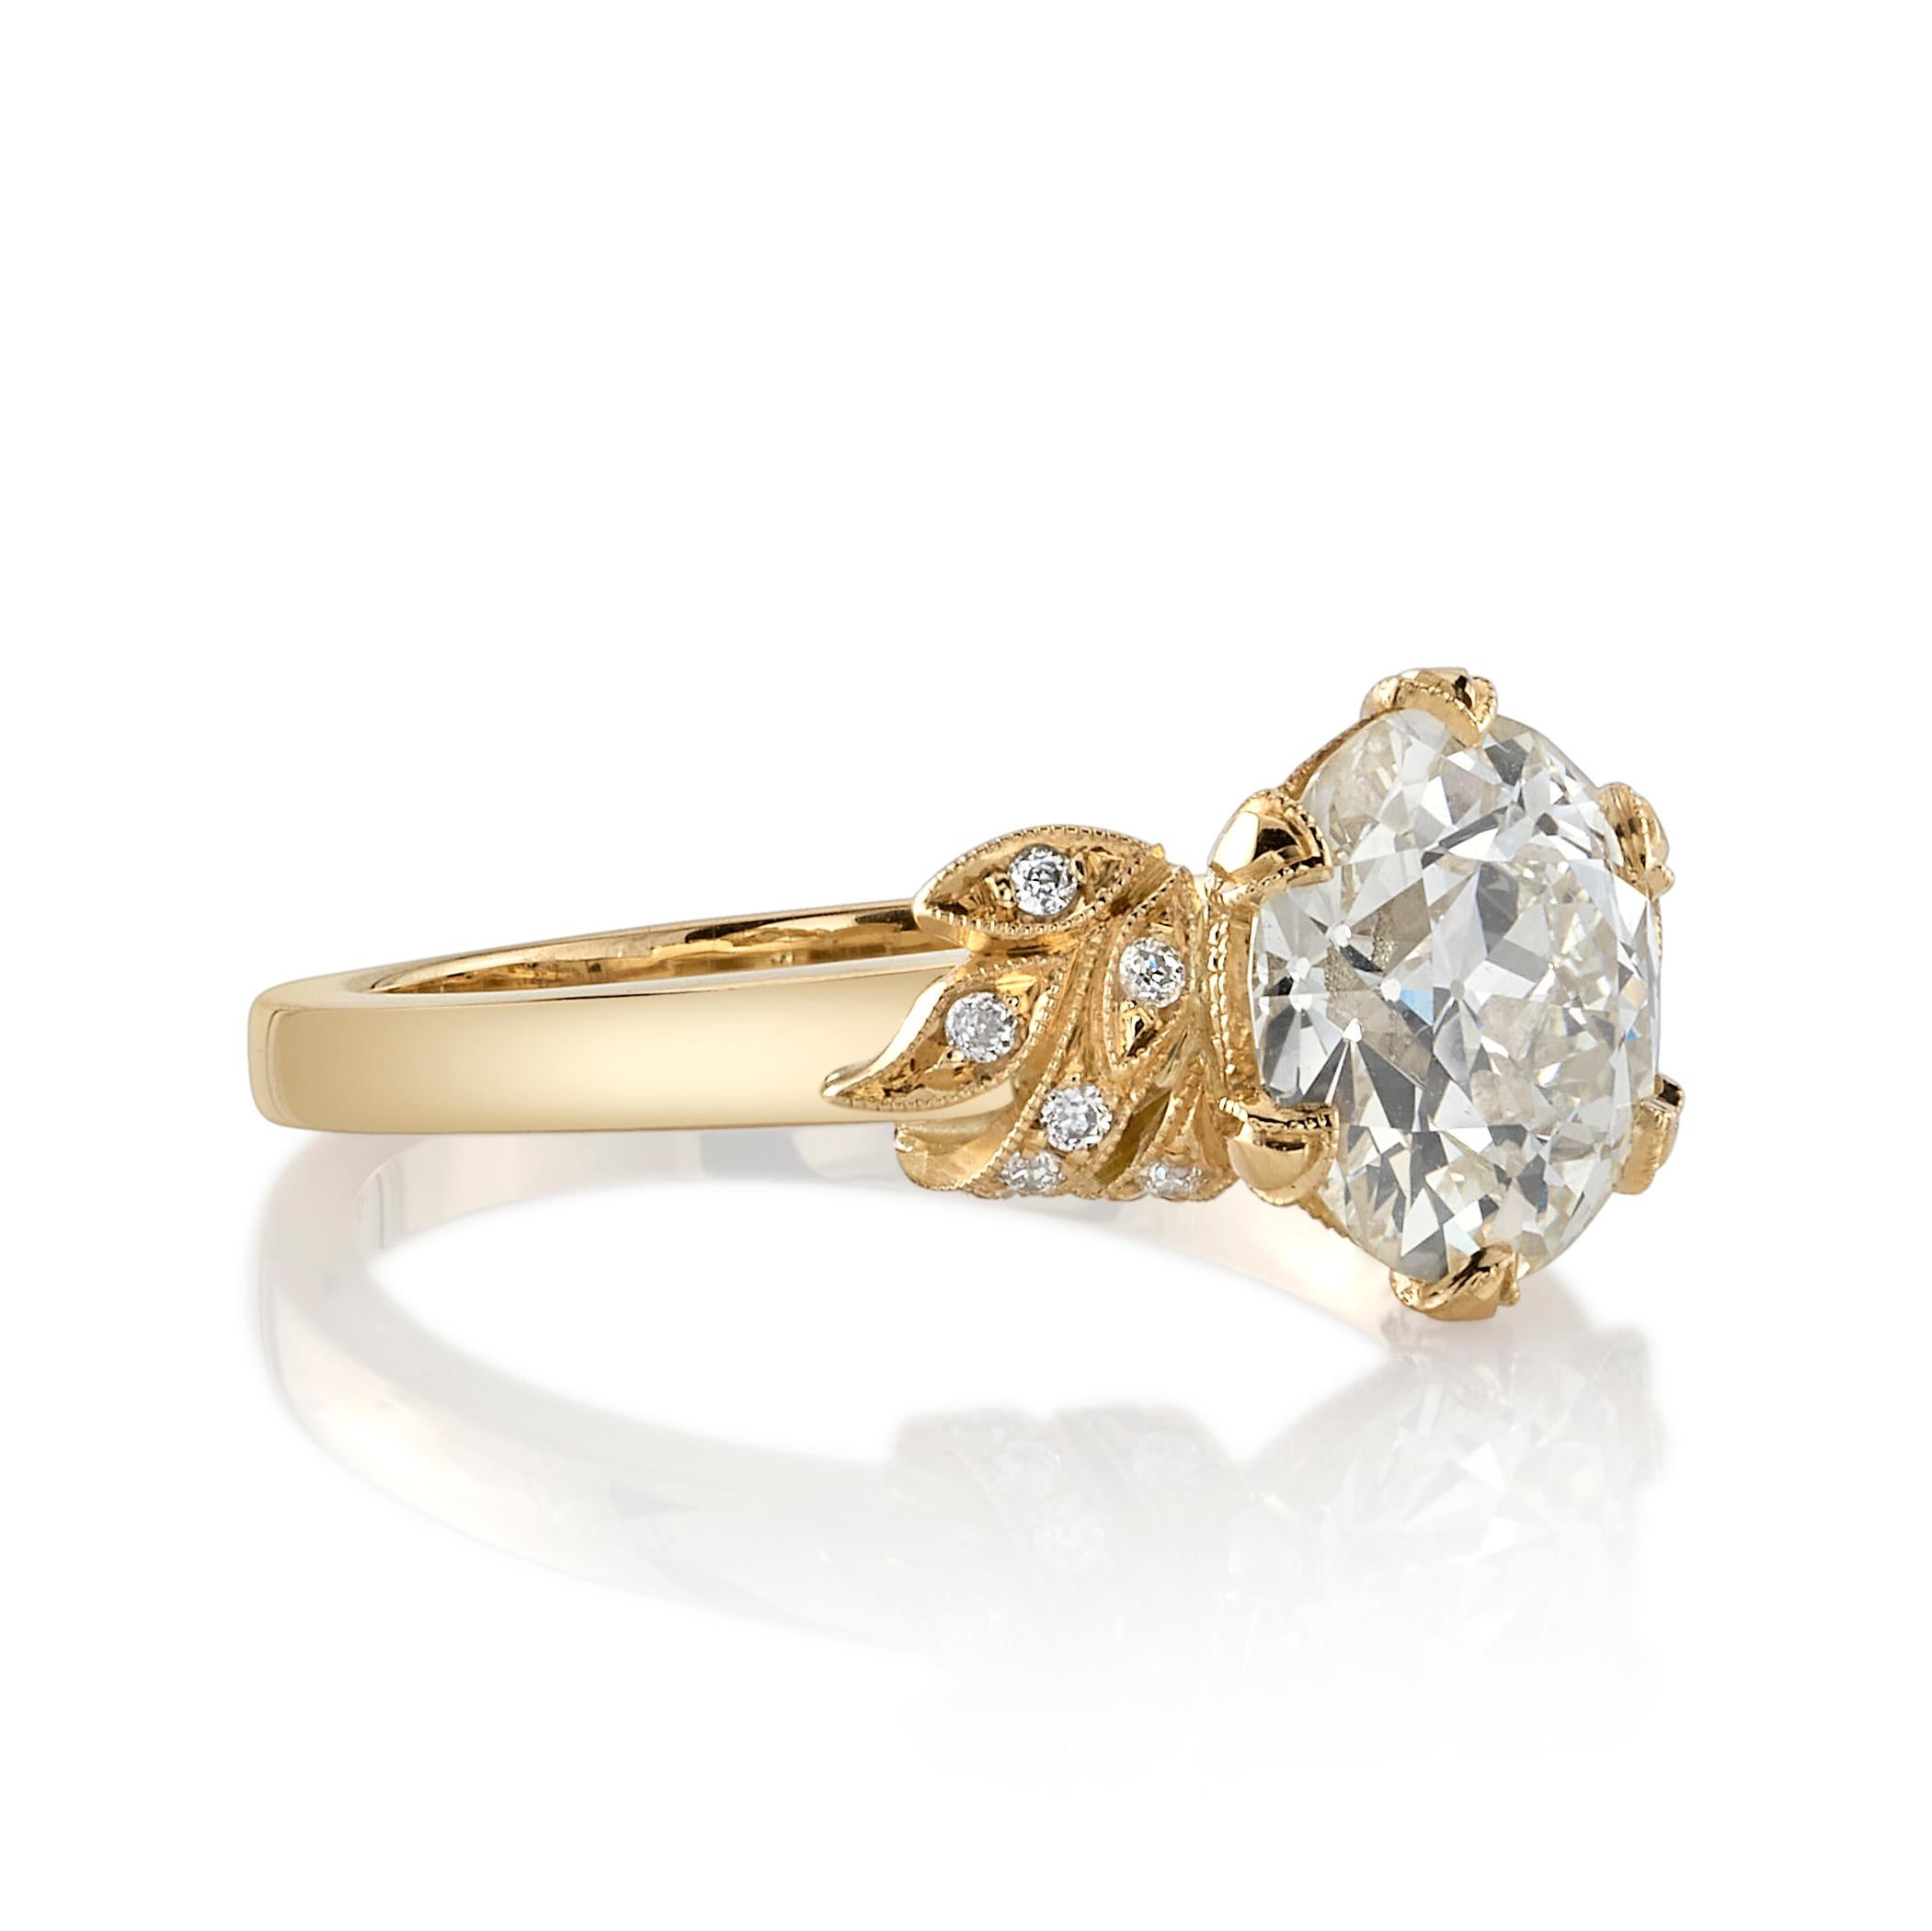 2.01ct O-P/VVS2 GIA certified old European cut diamond with 0.09ctw old European cut accent diamonds set in a handcrafted 18K yellow gold mounting.



